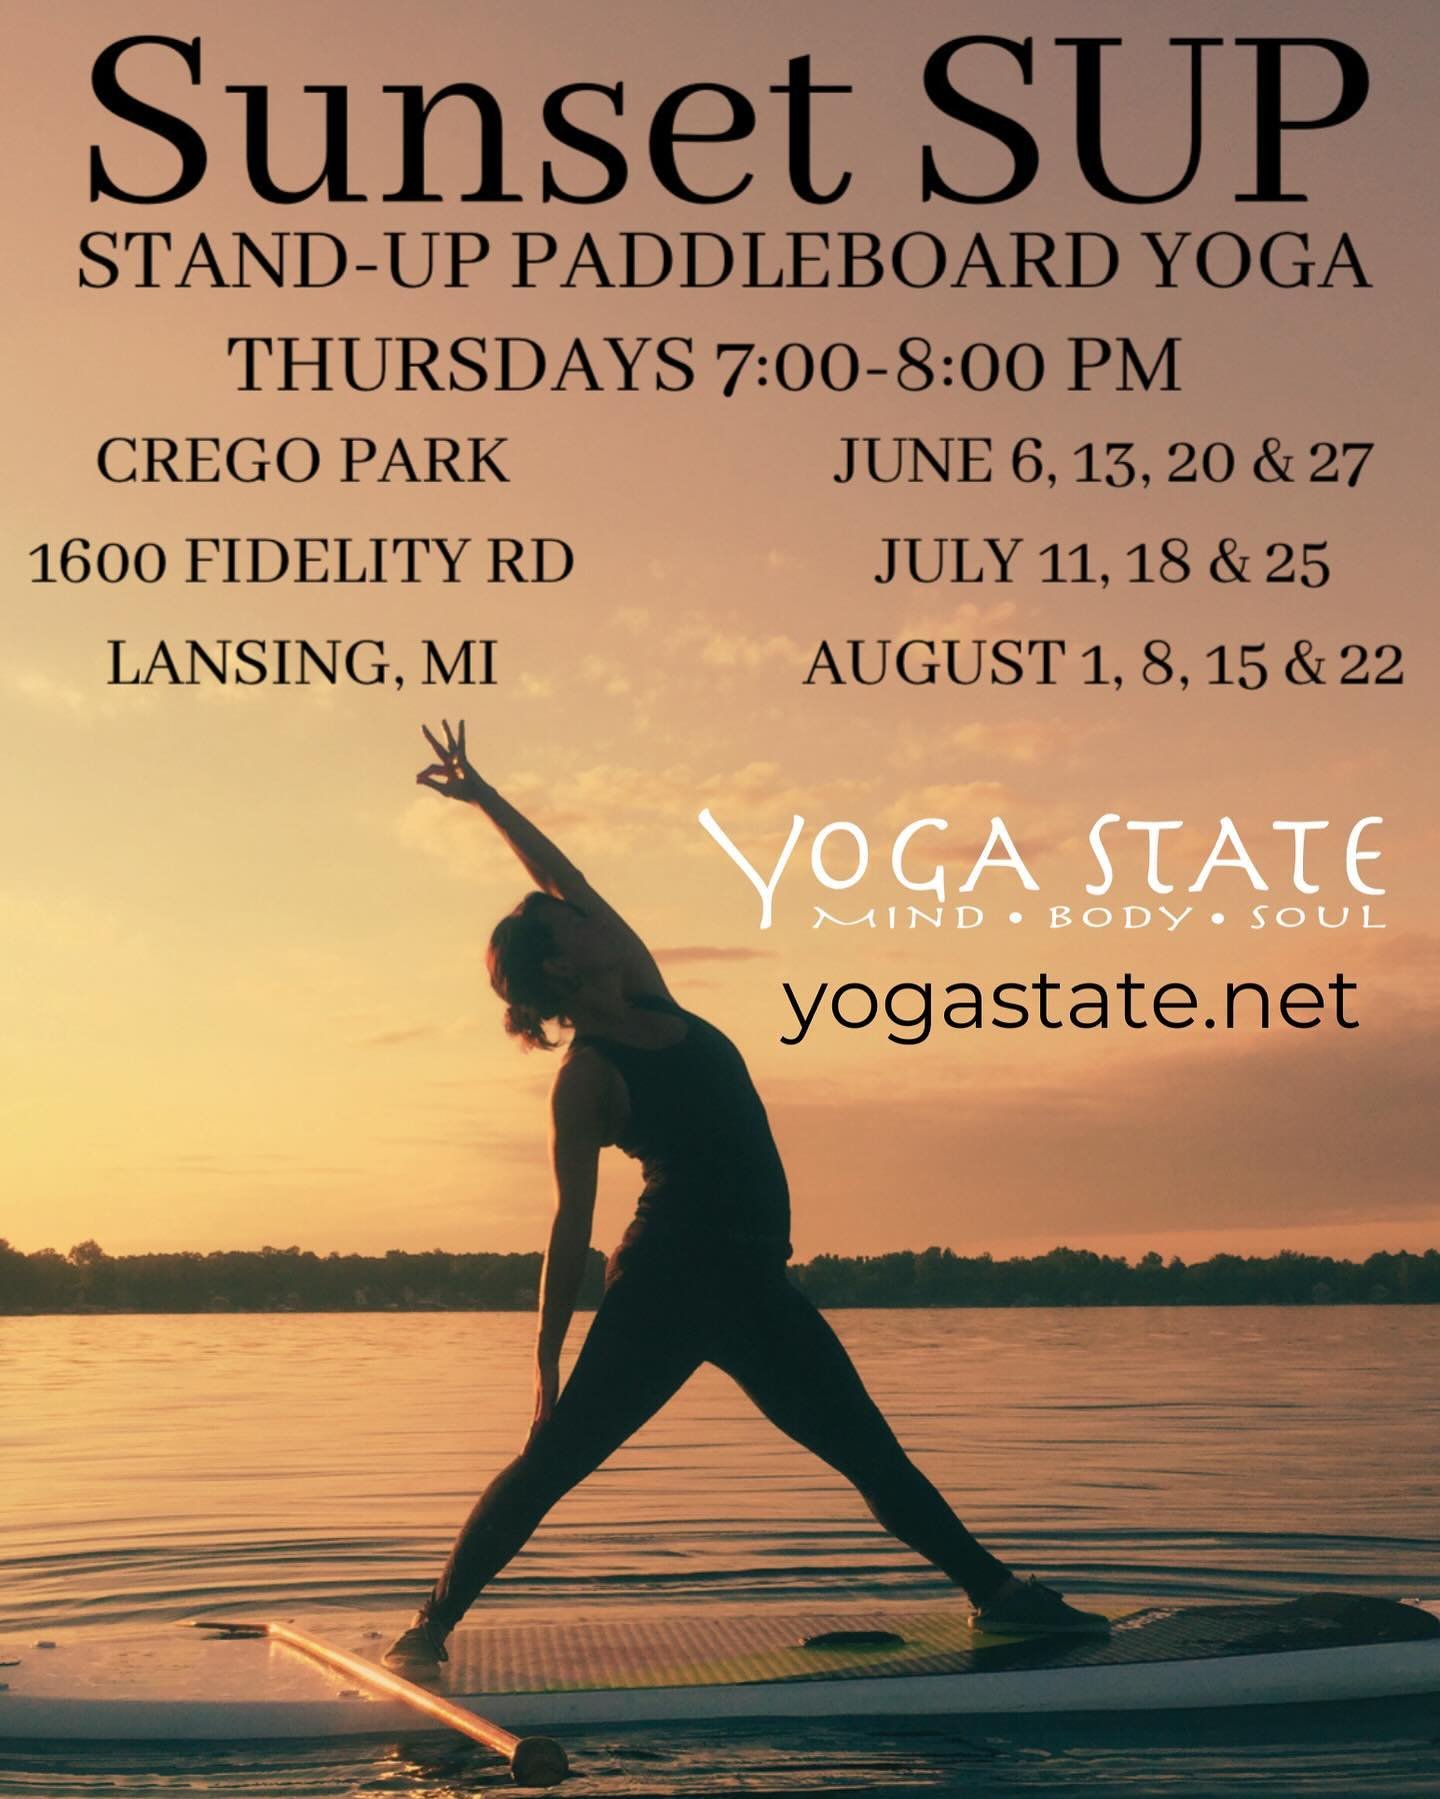 3 great deals just in time for Mother's Day and Summer! 
SUP (stand up paddle board) yoga can be an amazing way to add some variety into your practice! We have boards that you can rent or you can bring your own and join the class. 

The unlimited sum